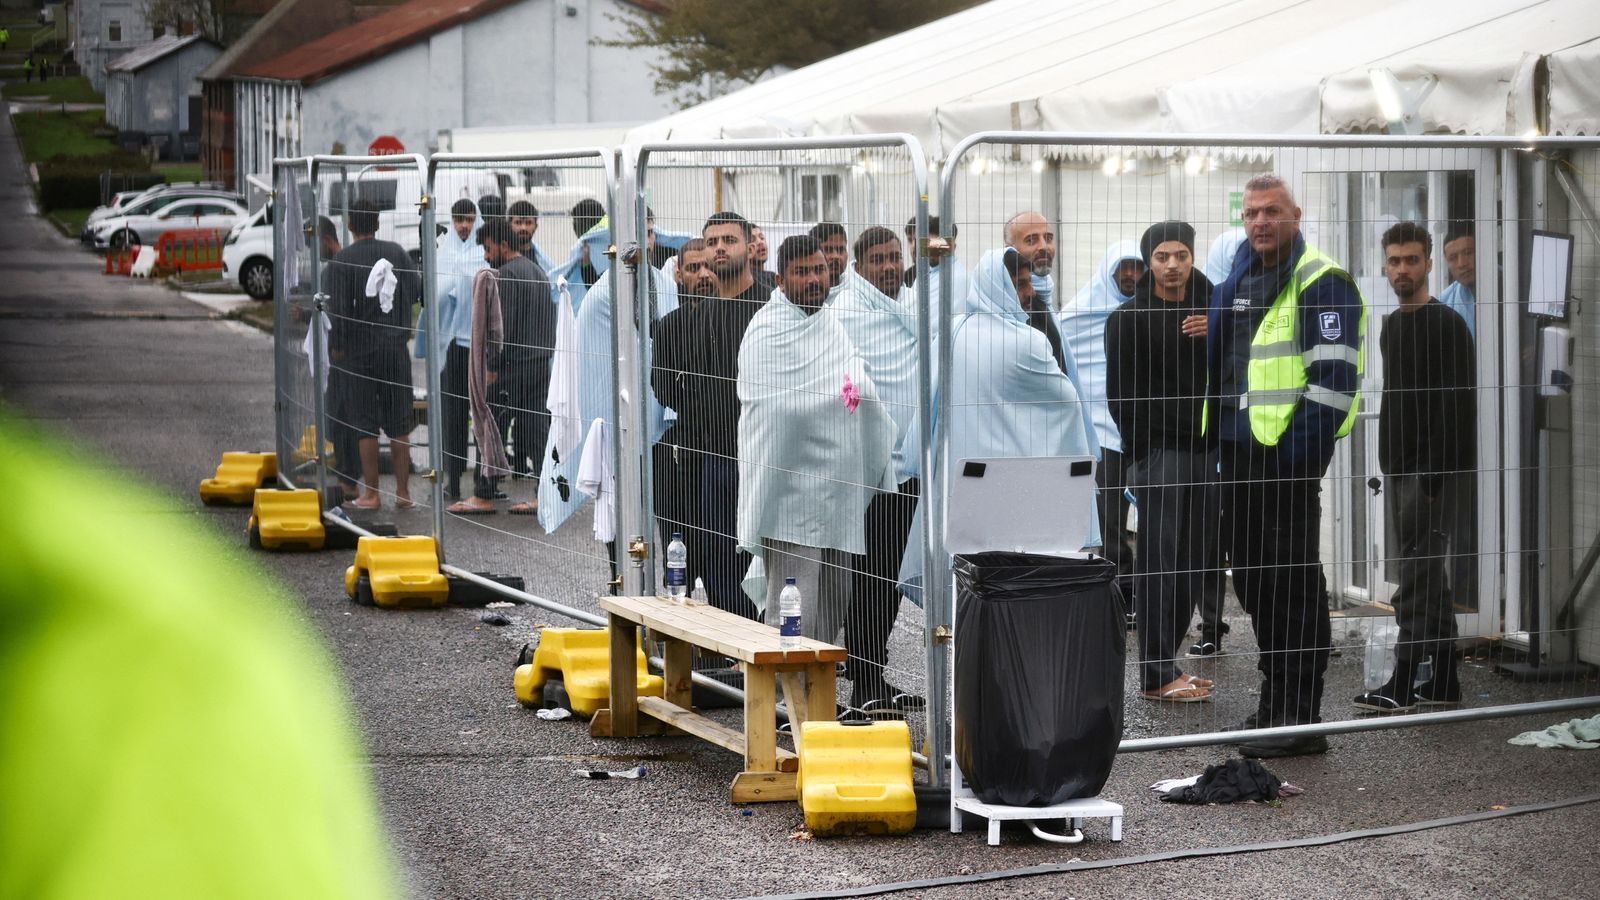 50 migrants diagnosed with diphtheria in UK this year, with most in last two months